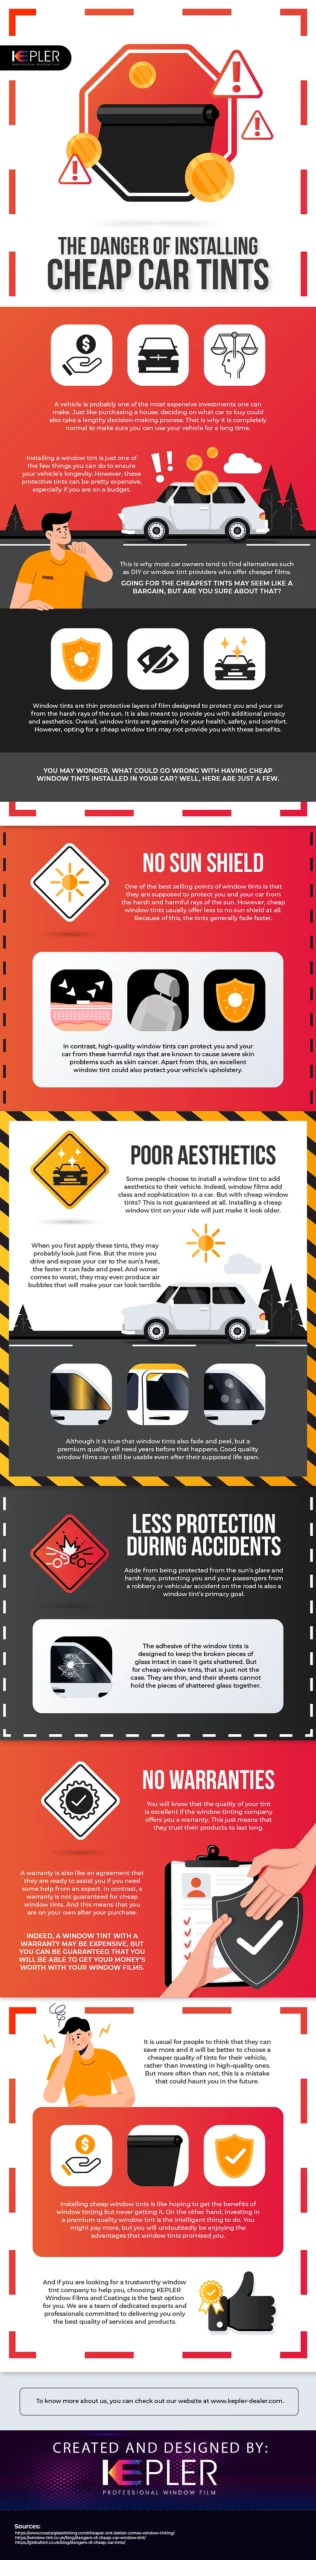 The Danger Of Installing Cheap Car Tints - Infographic